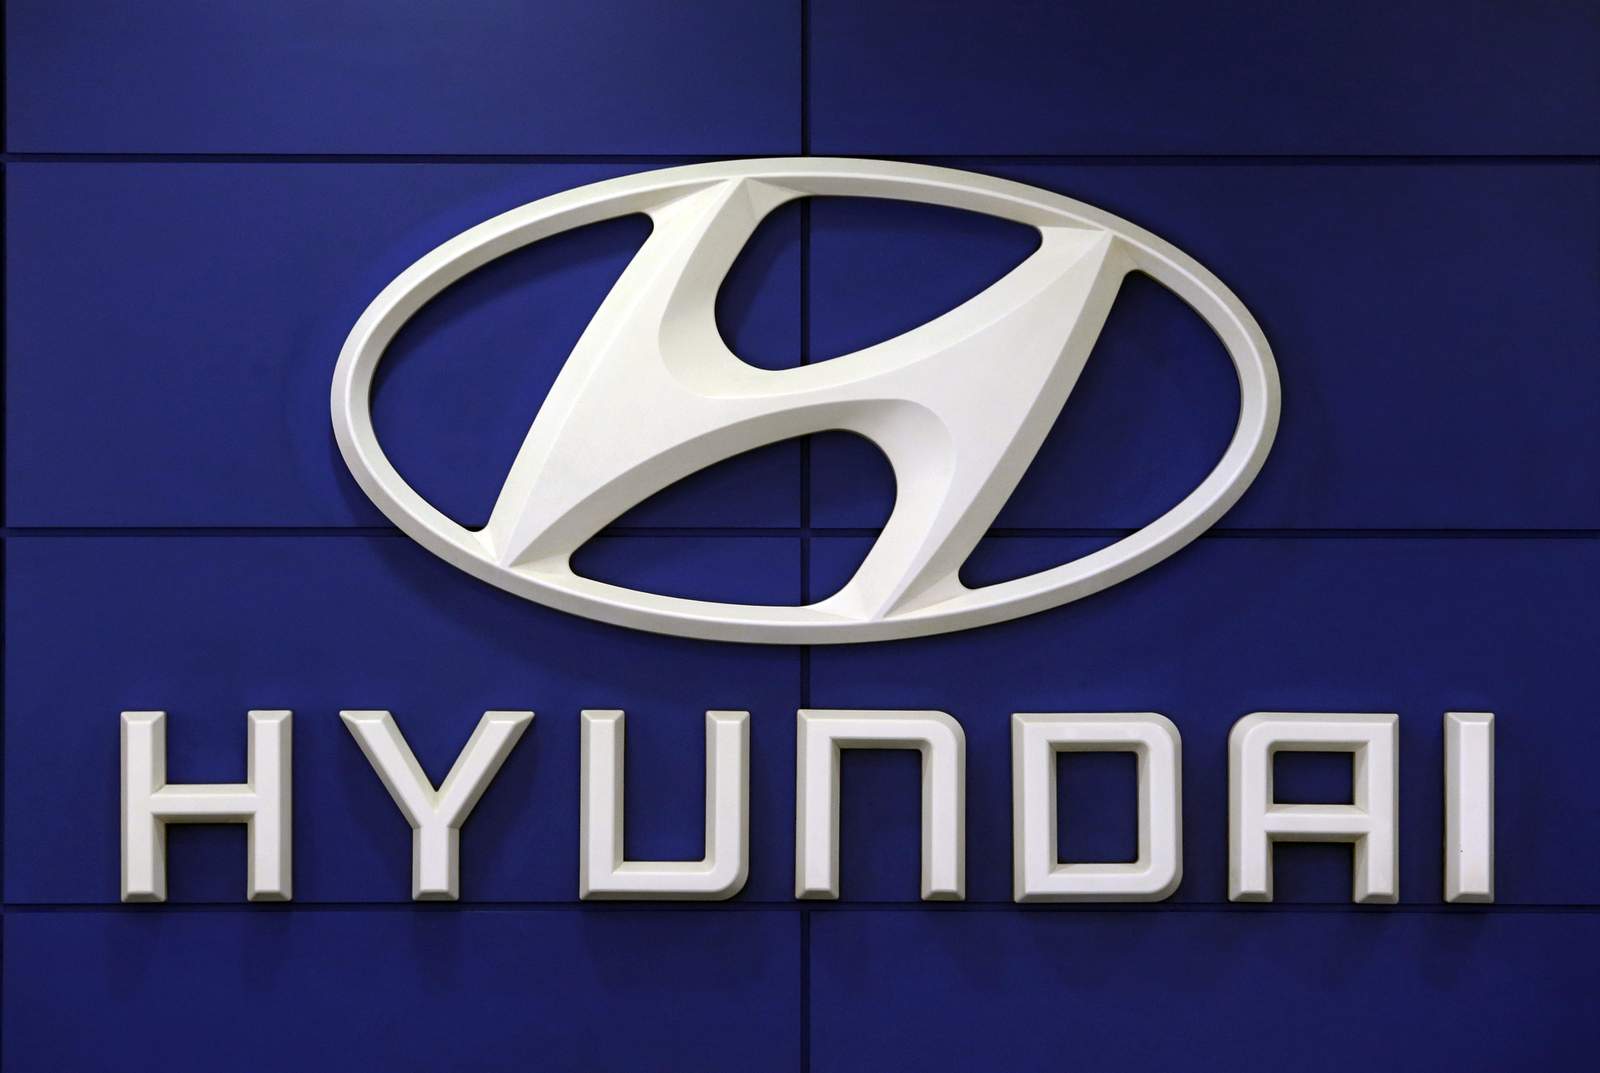 Hyundai warns owners to park outside, recalls 180,000 SUVs